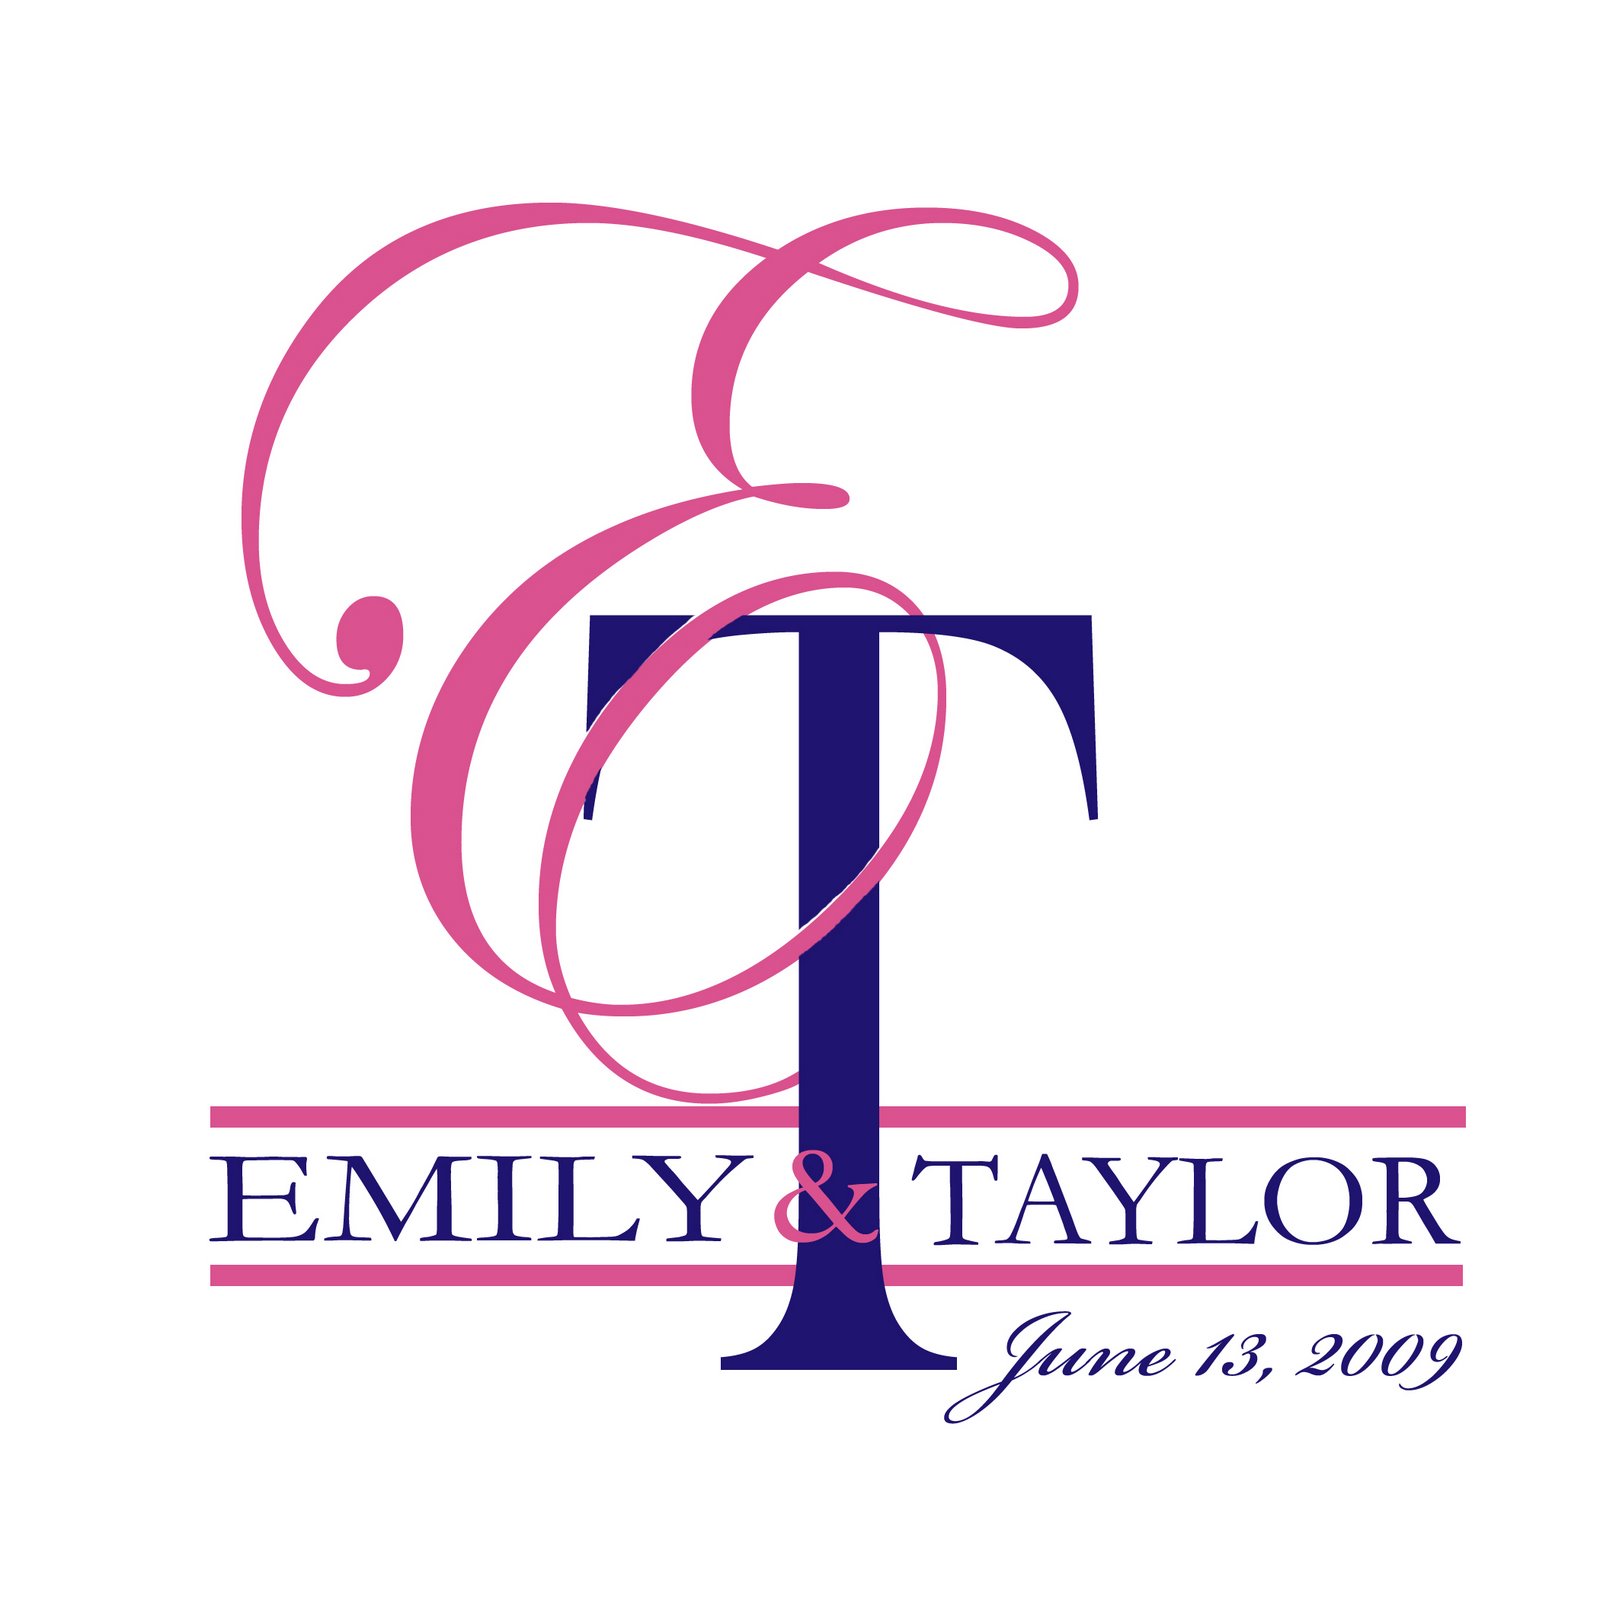 Emily and Taylor 2009